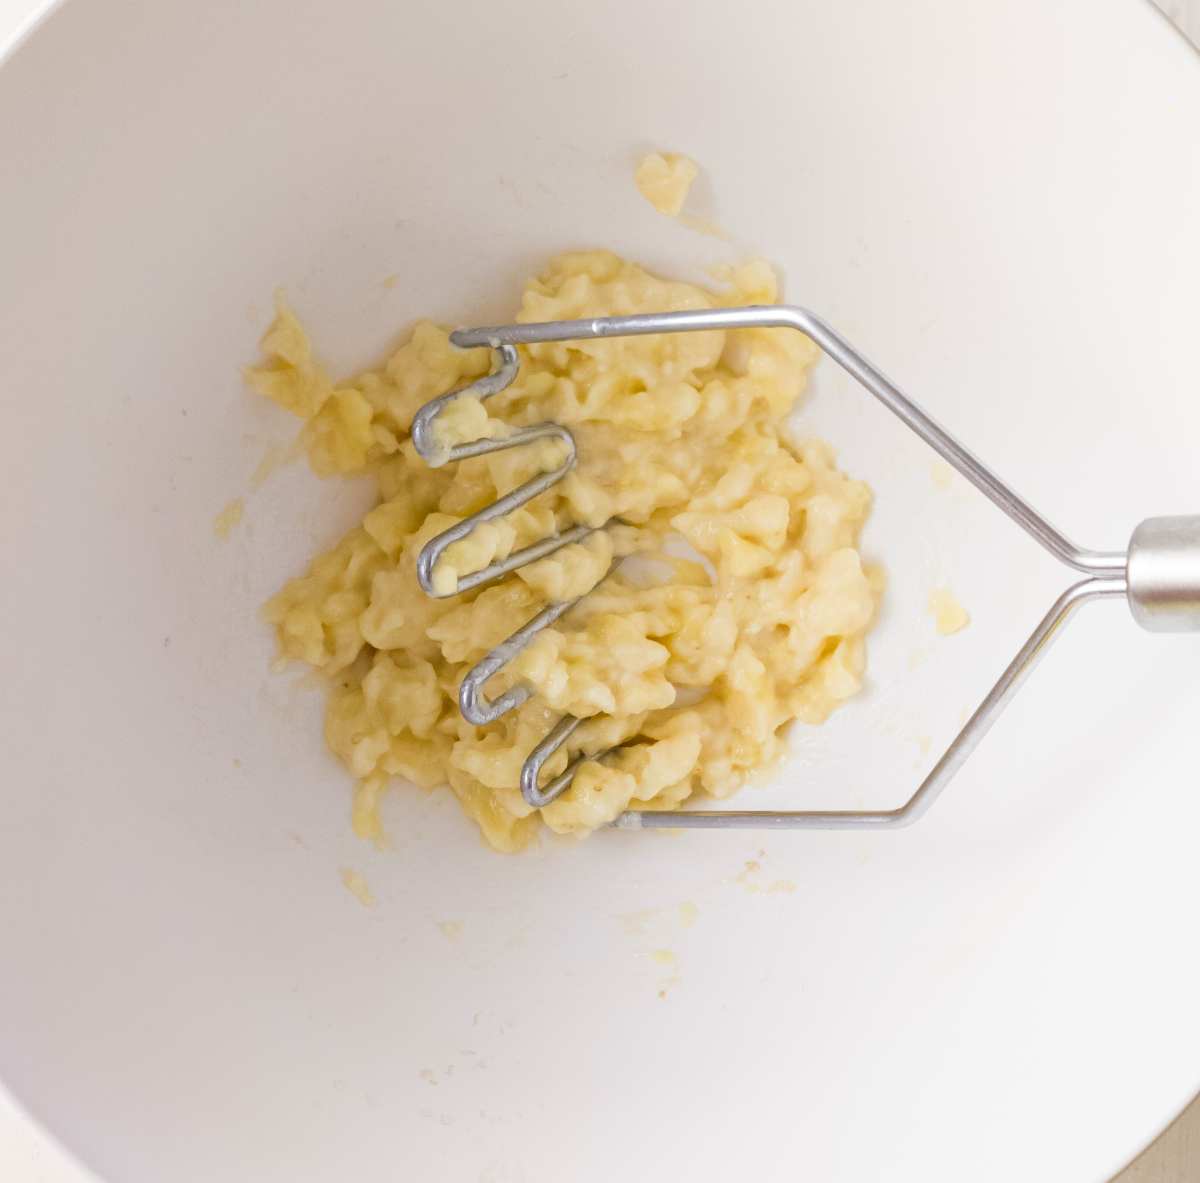 Mashed bananas in a bowl with a potato masher.